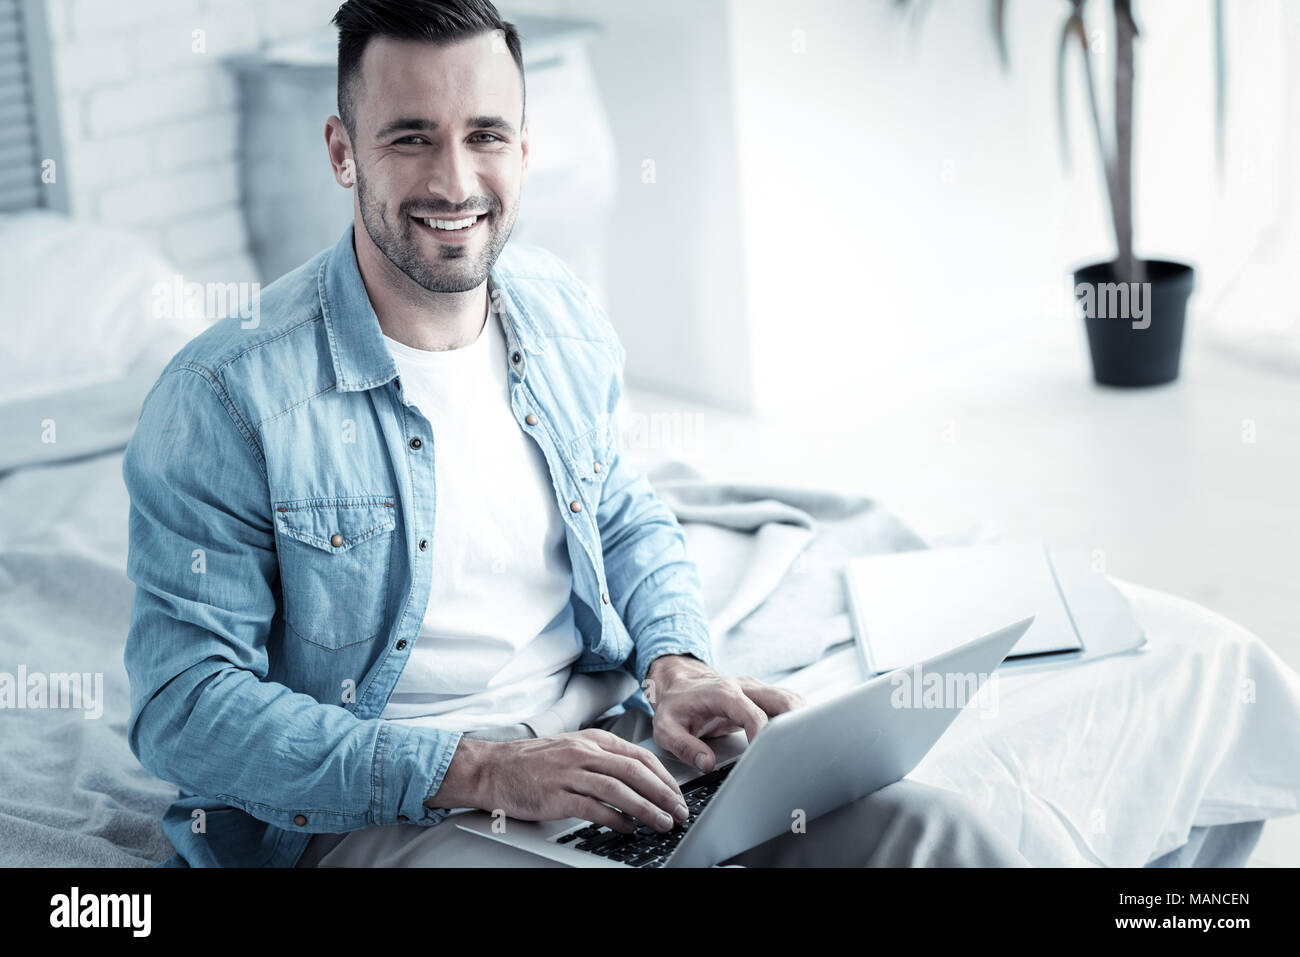 Delighted cheerful man using his laptop Stock Photo